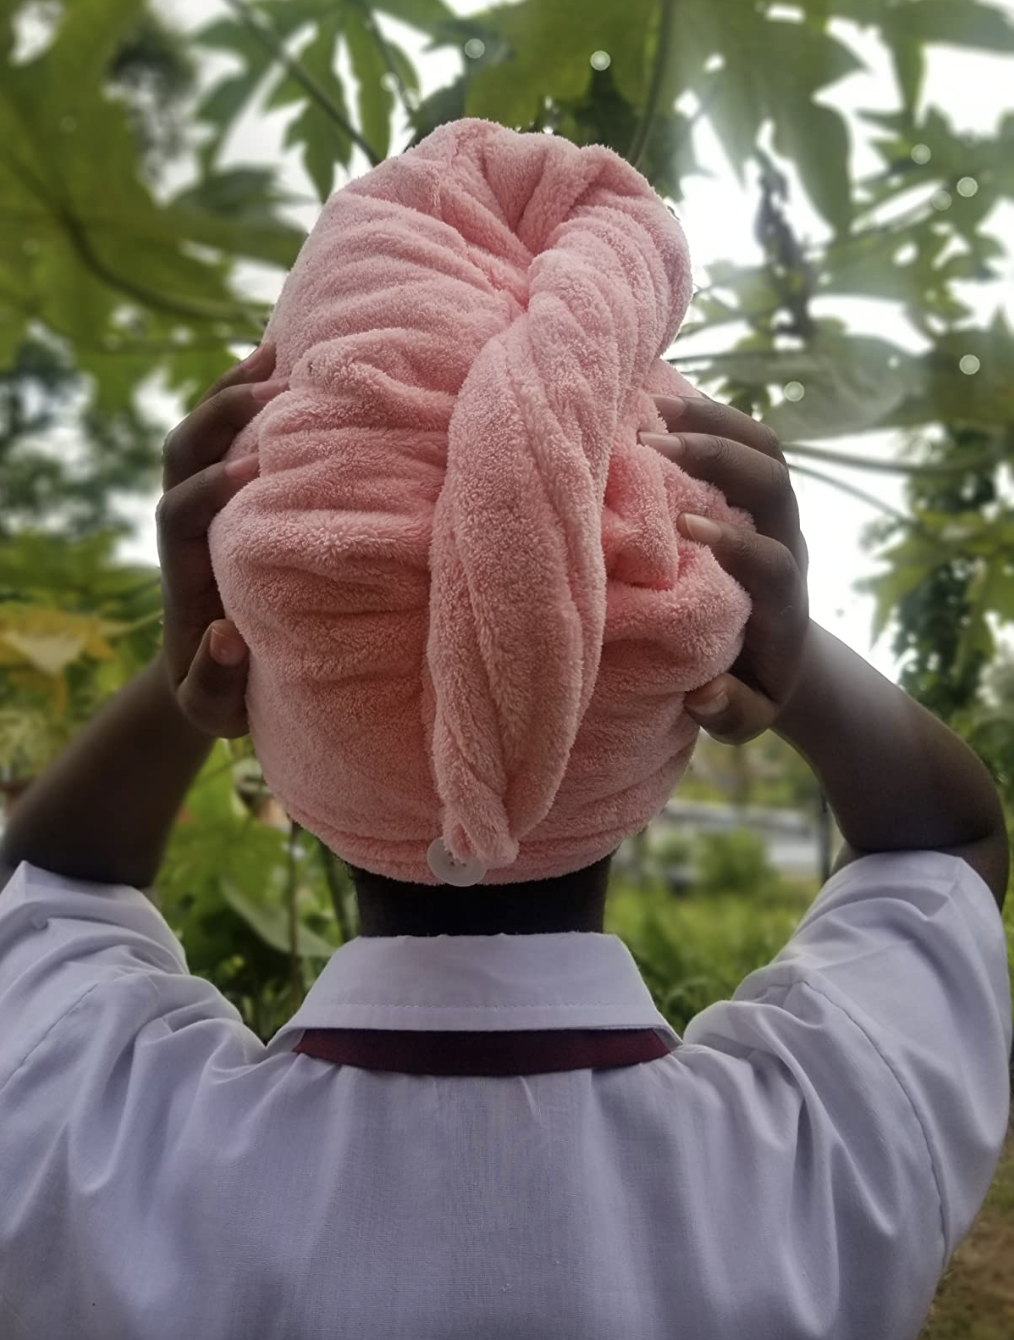 a reviewer photo of a person wearing the pink towel and showing the back